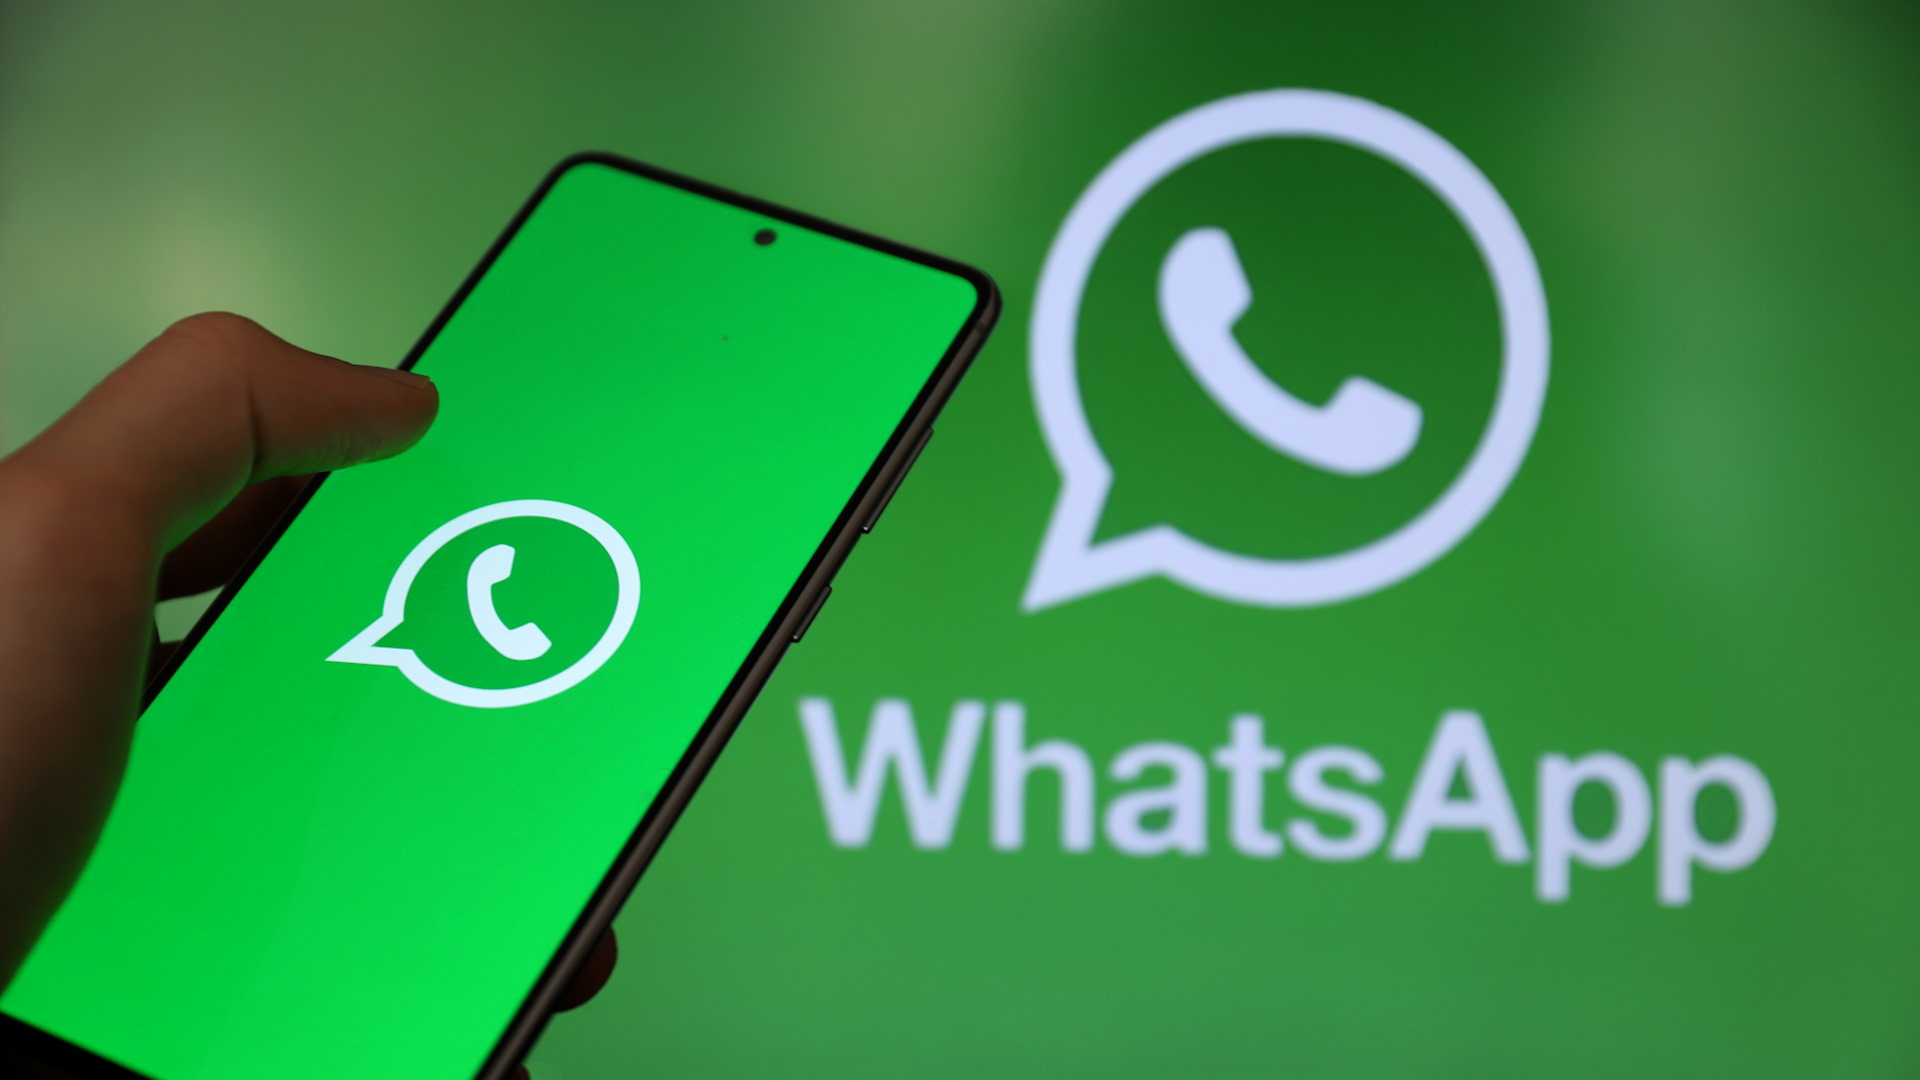 WhatsApp plans to enable screen sharing for watching videos and listening to music together